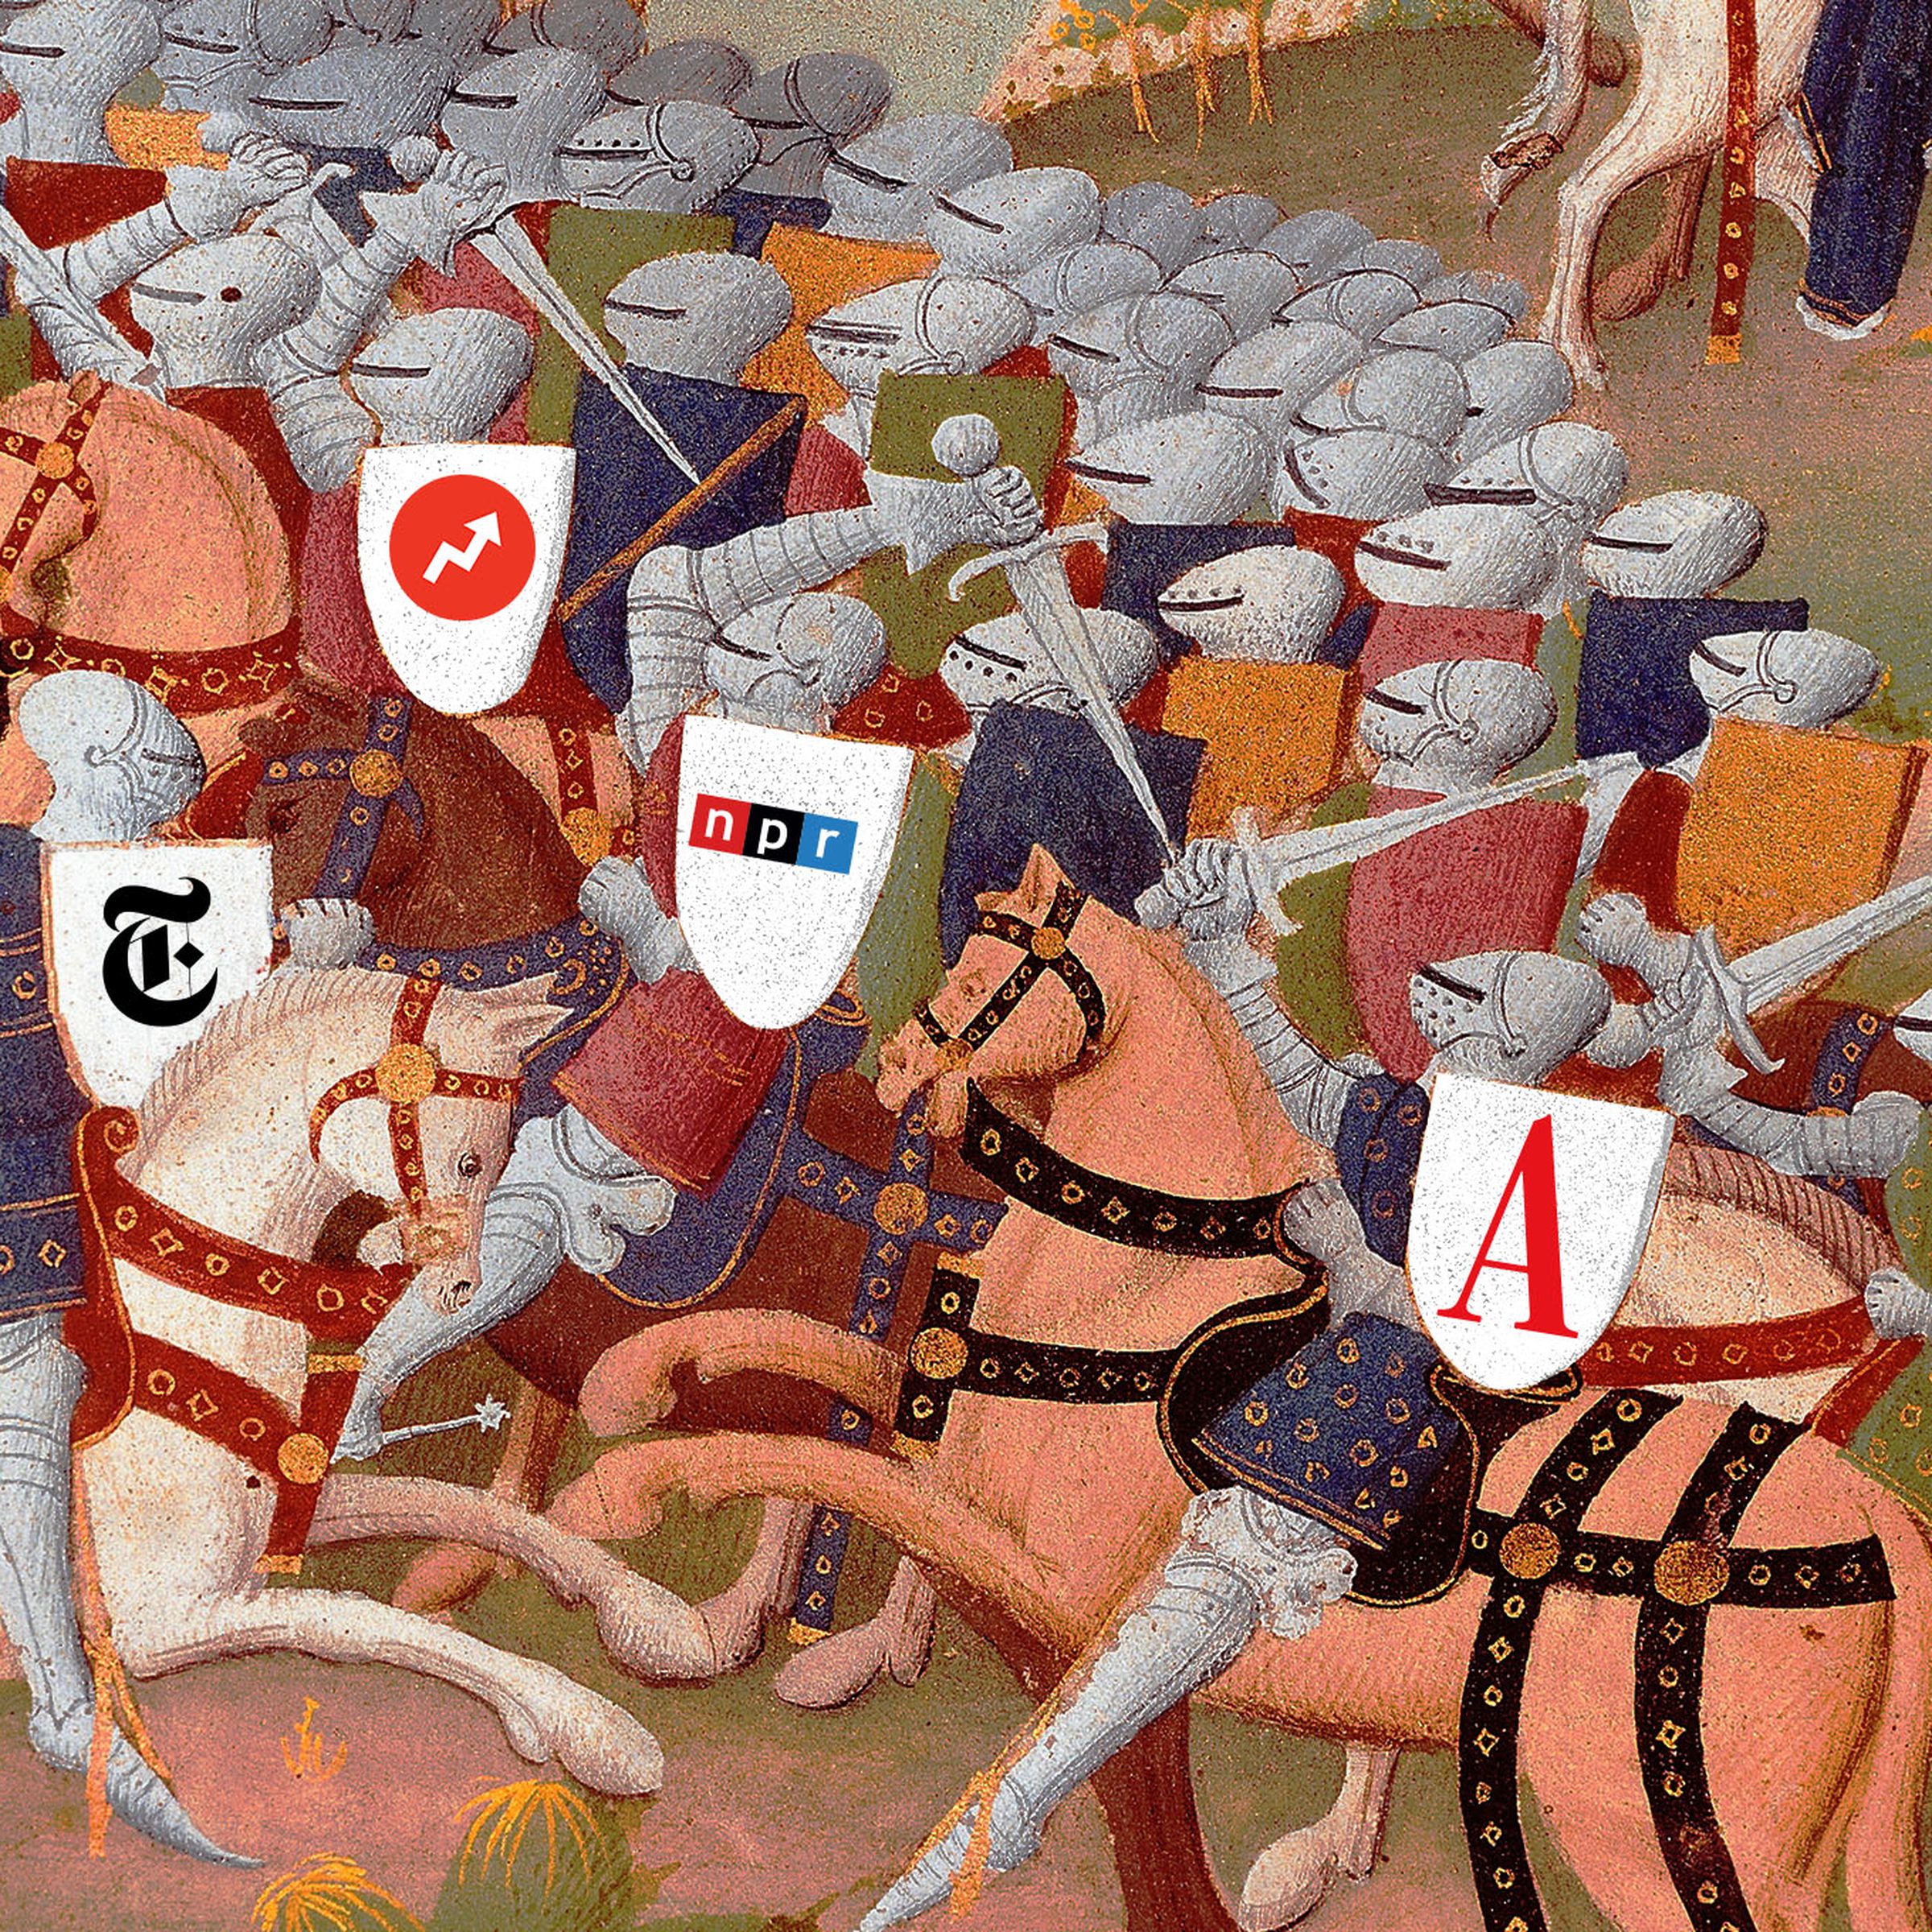 Collage of a piece of medieval art of knights battling but their shields are different news media company logos.